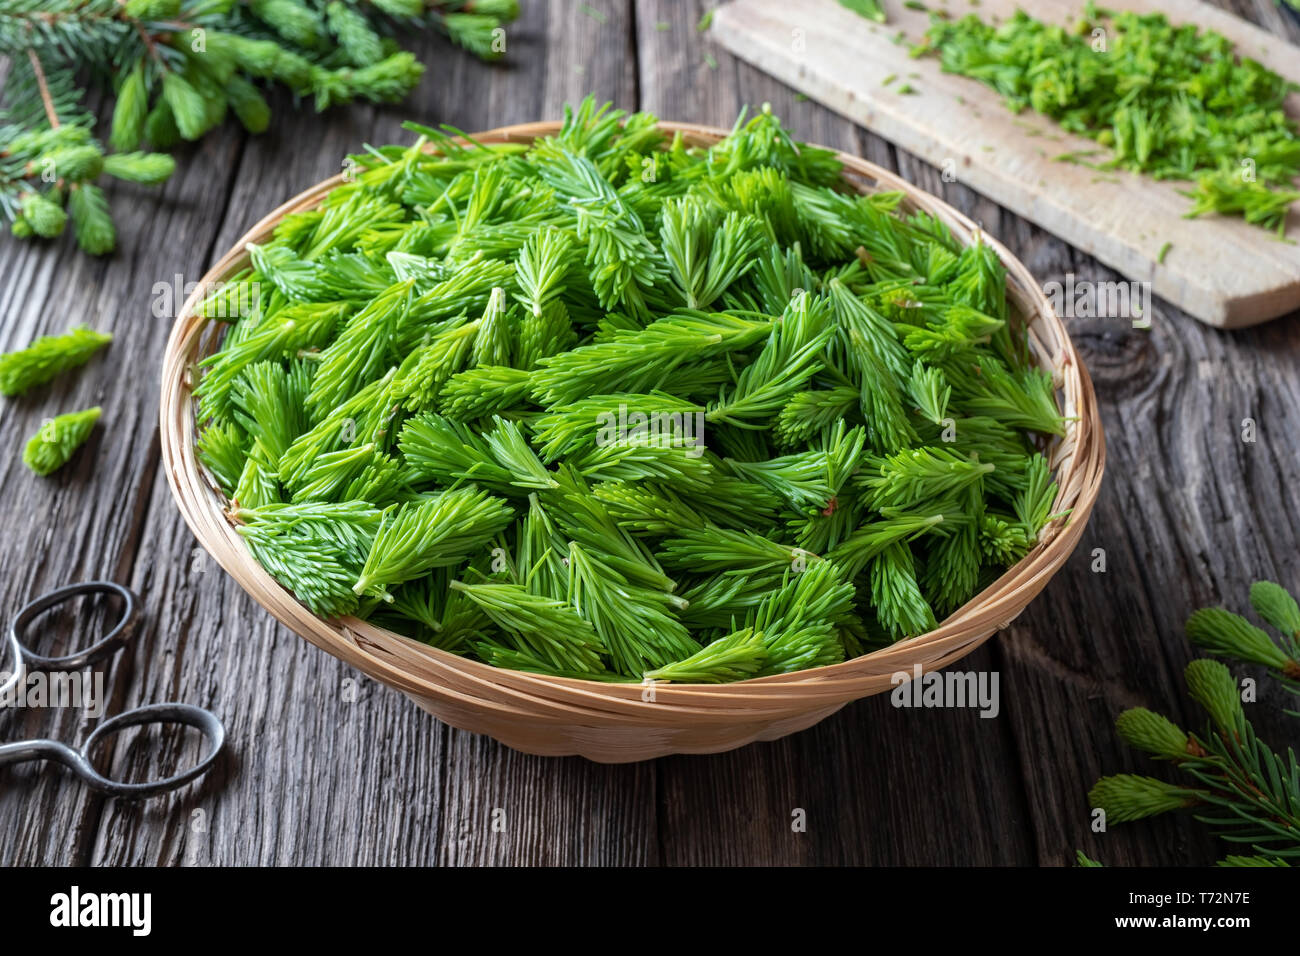 Young spruce tips collected in a basket to prepare homemade herbal syrup Stock Photo